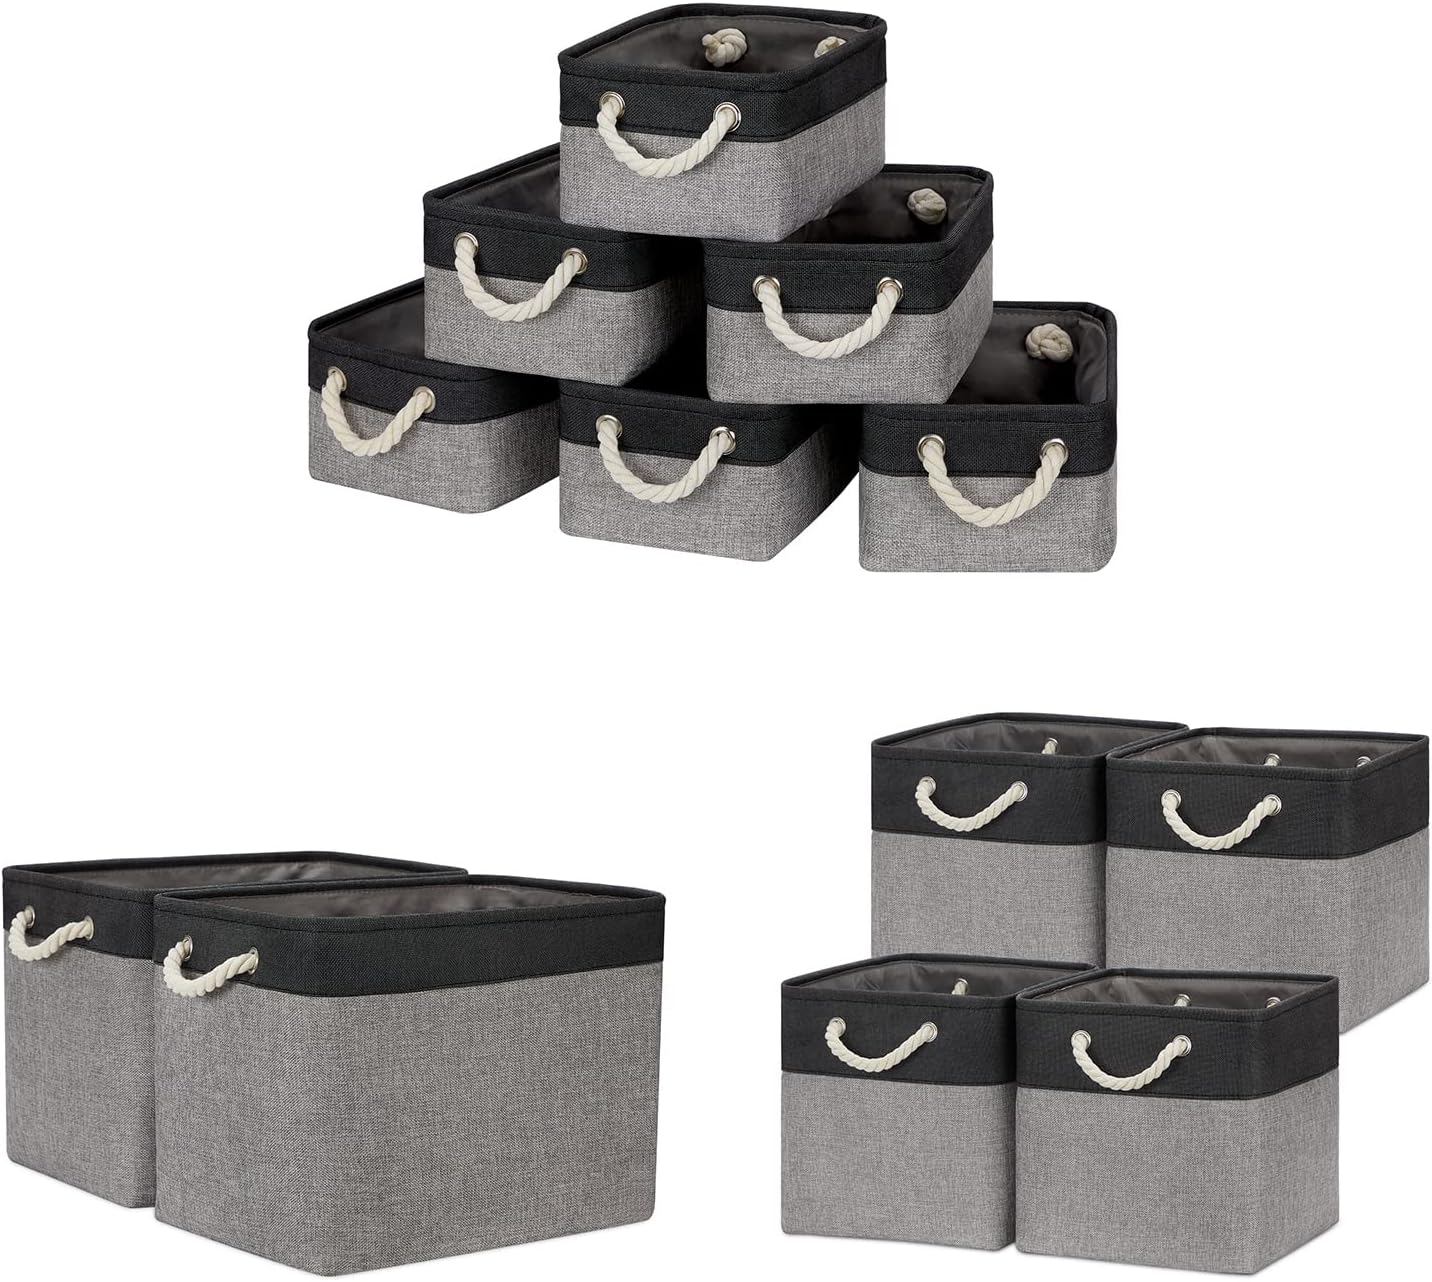 Temary Storage Baskets Small Fabric Storage Bins Large Baskets for Organizing Towels, Blankets (Black&Gray, 6Pack-11.8Lx7.9Wx5.3H , 2Pack-16Lx12Wx12H , 4Pack-12Lx12Wx12H )